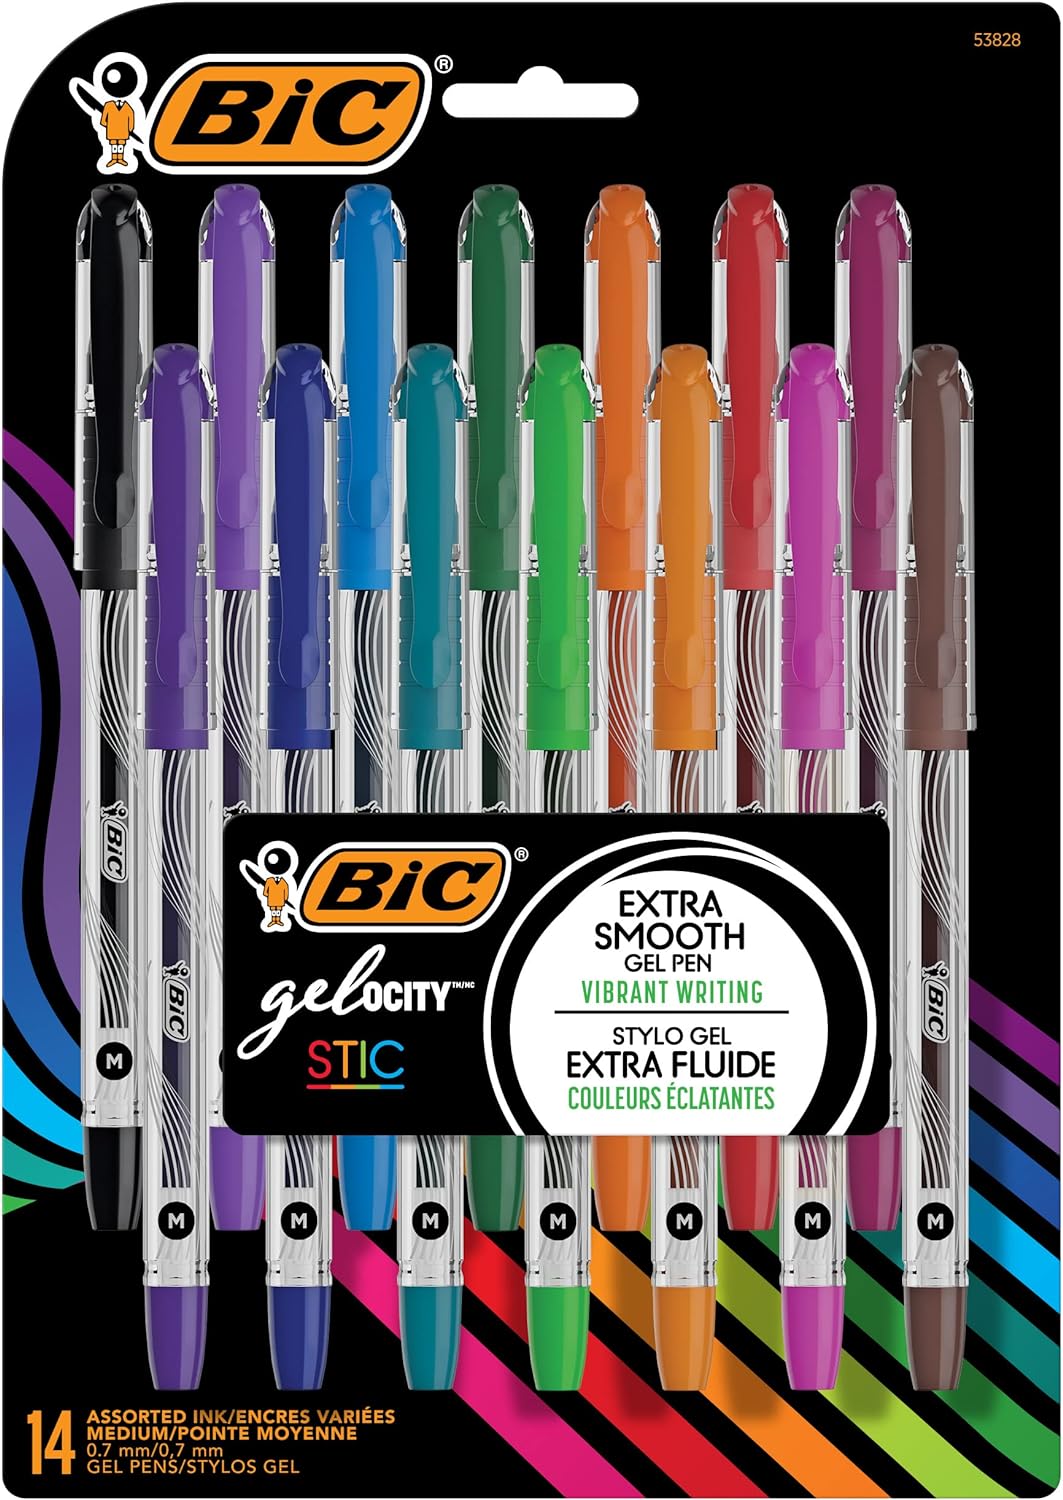 BIC Gel-ocity Stic Assorted Colors Gel Pen Set, Medium Point (0.7mm), 14-Count Pack, Colorful Pens for Journaling and Lists (RGSMP14-AST)